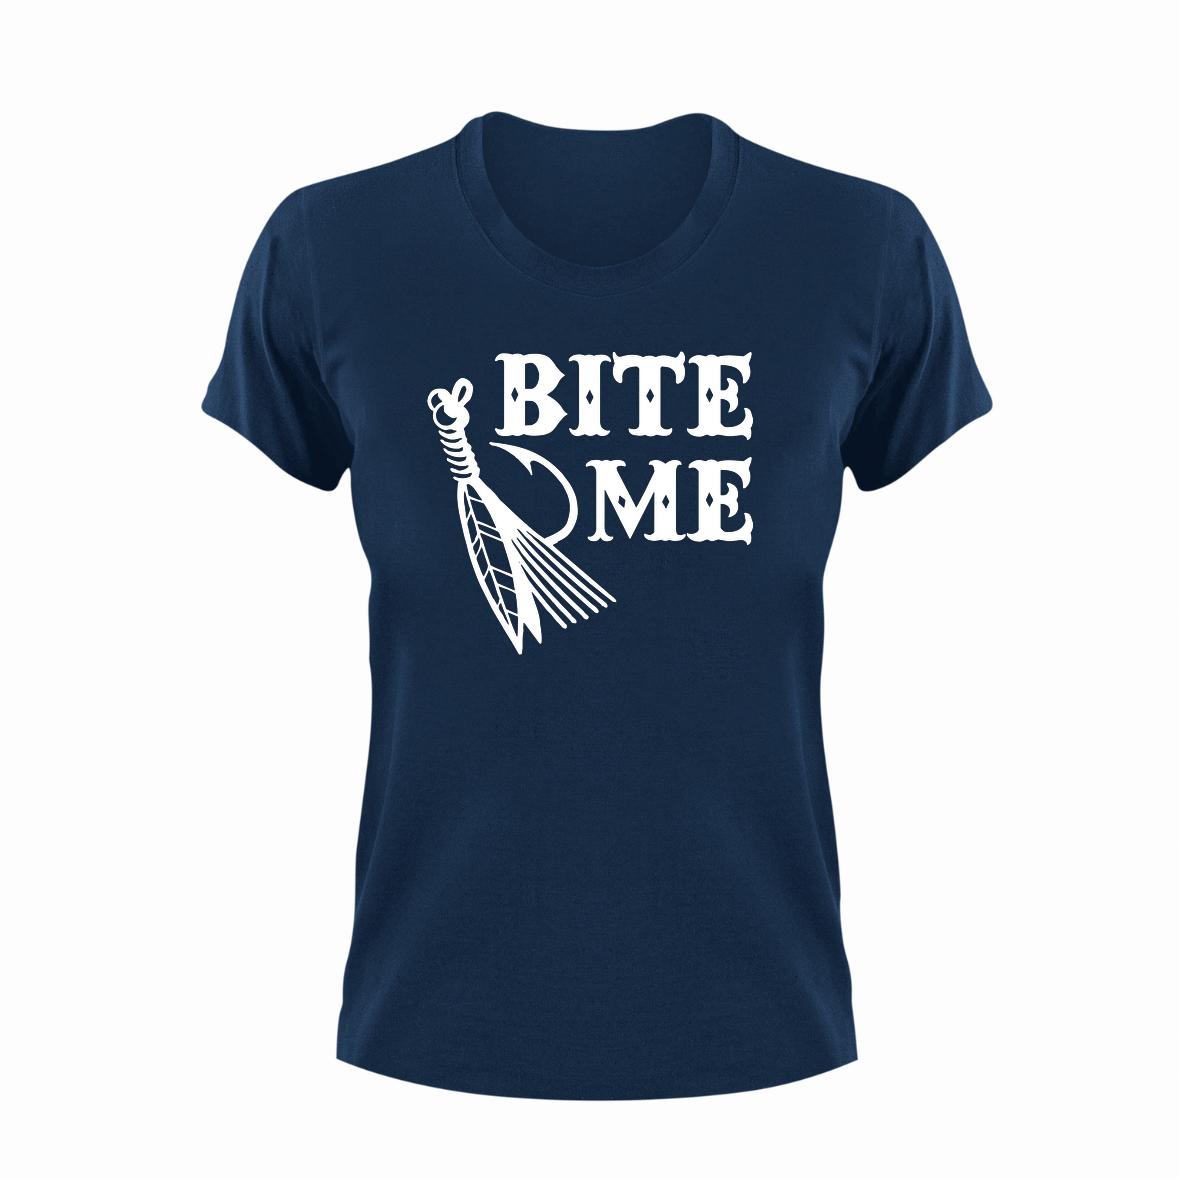 T-shirts - Bite me Fishing T-Shirt - Large / White / Classic Unisex Fit was  listed for R299.00 on 24 Aug at 20:19 by T-shirt vault in Johannesburg  (ID:573287164)